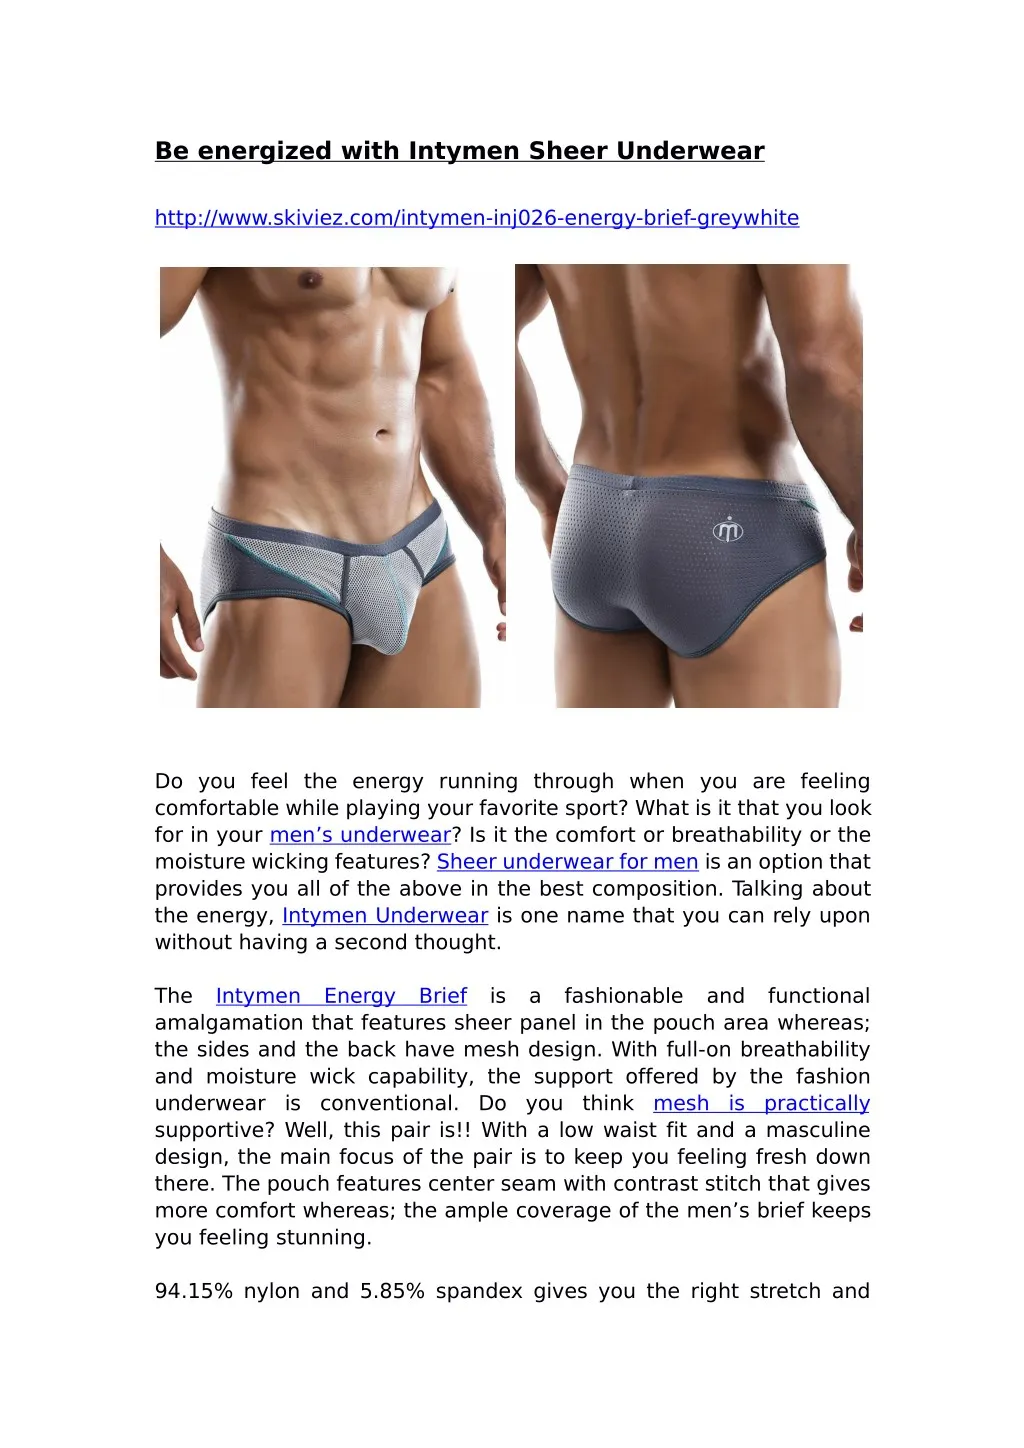 be energized with intymen sheer underwear